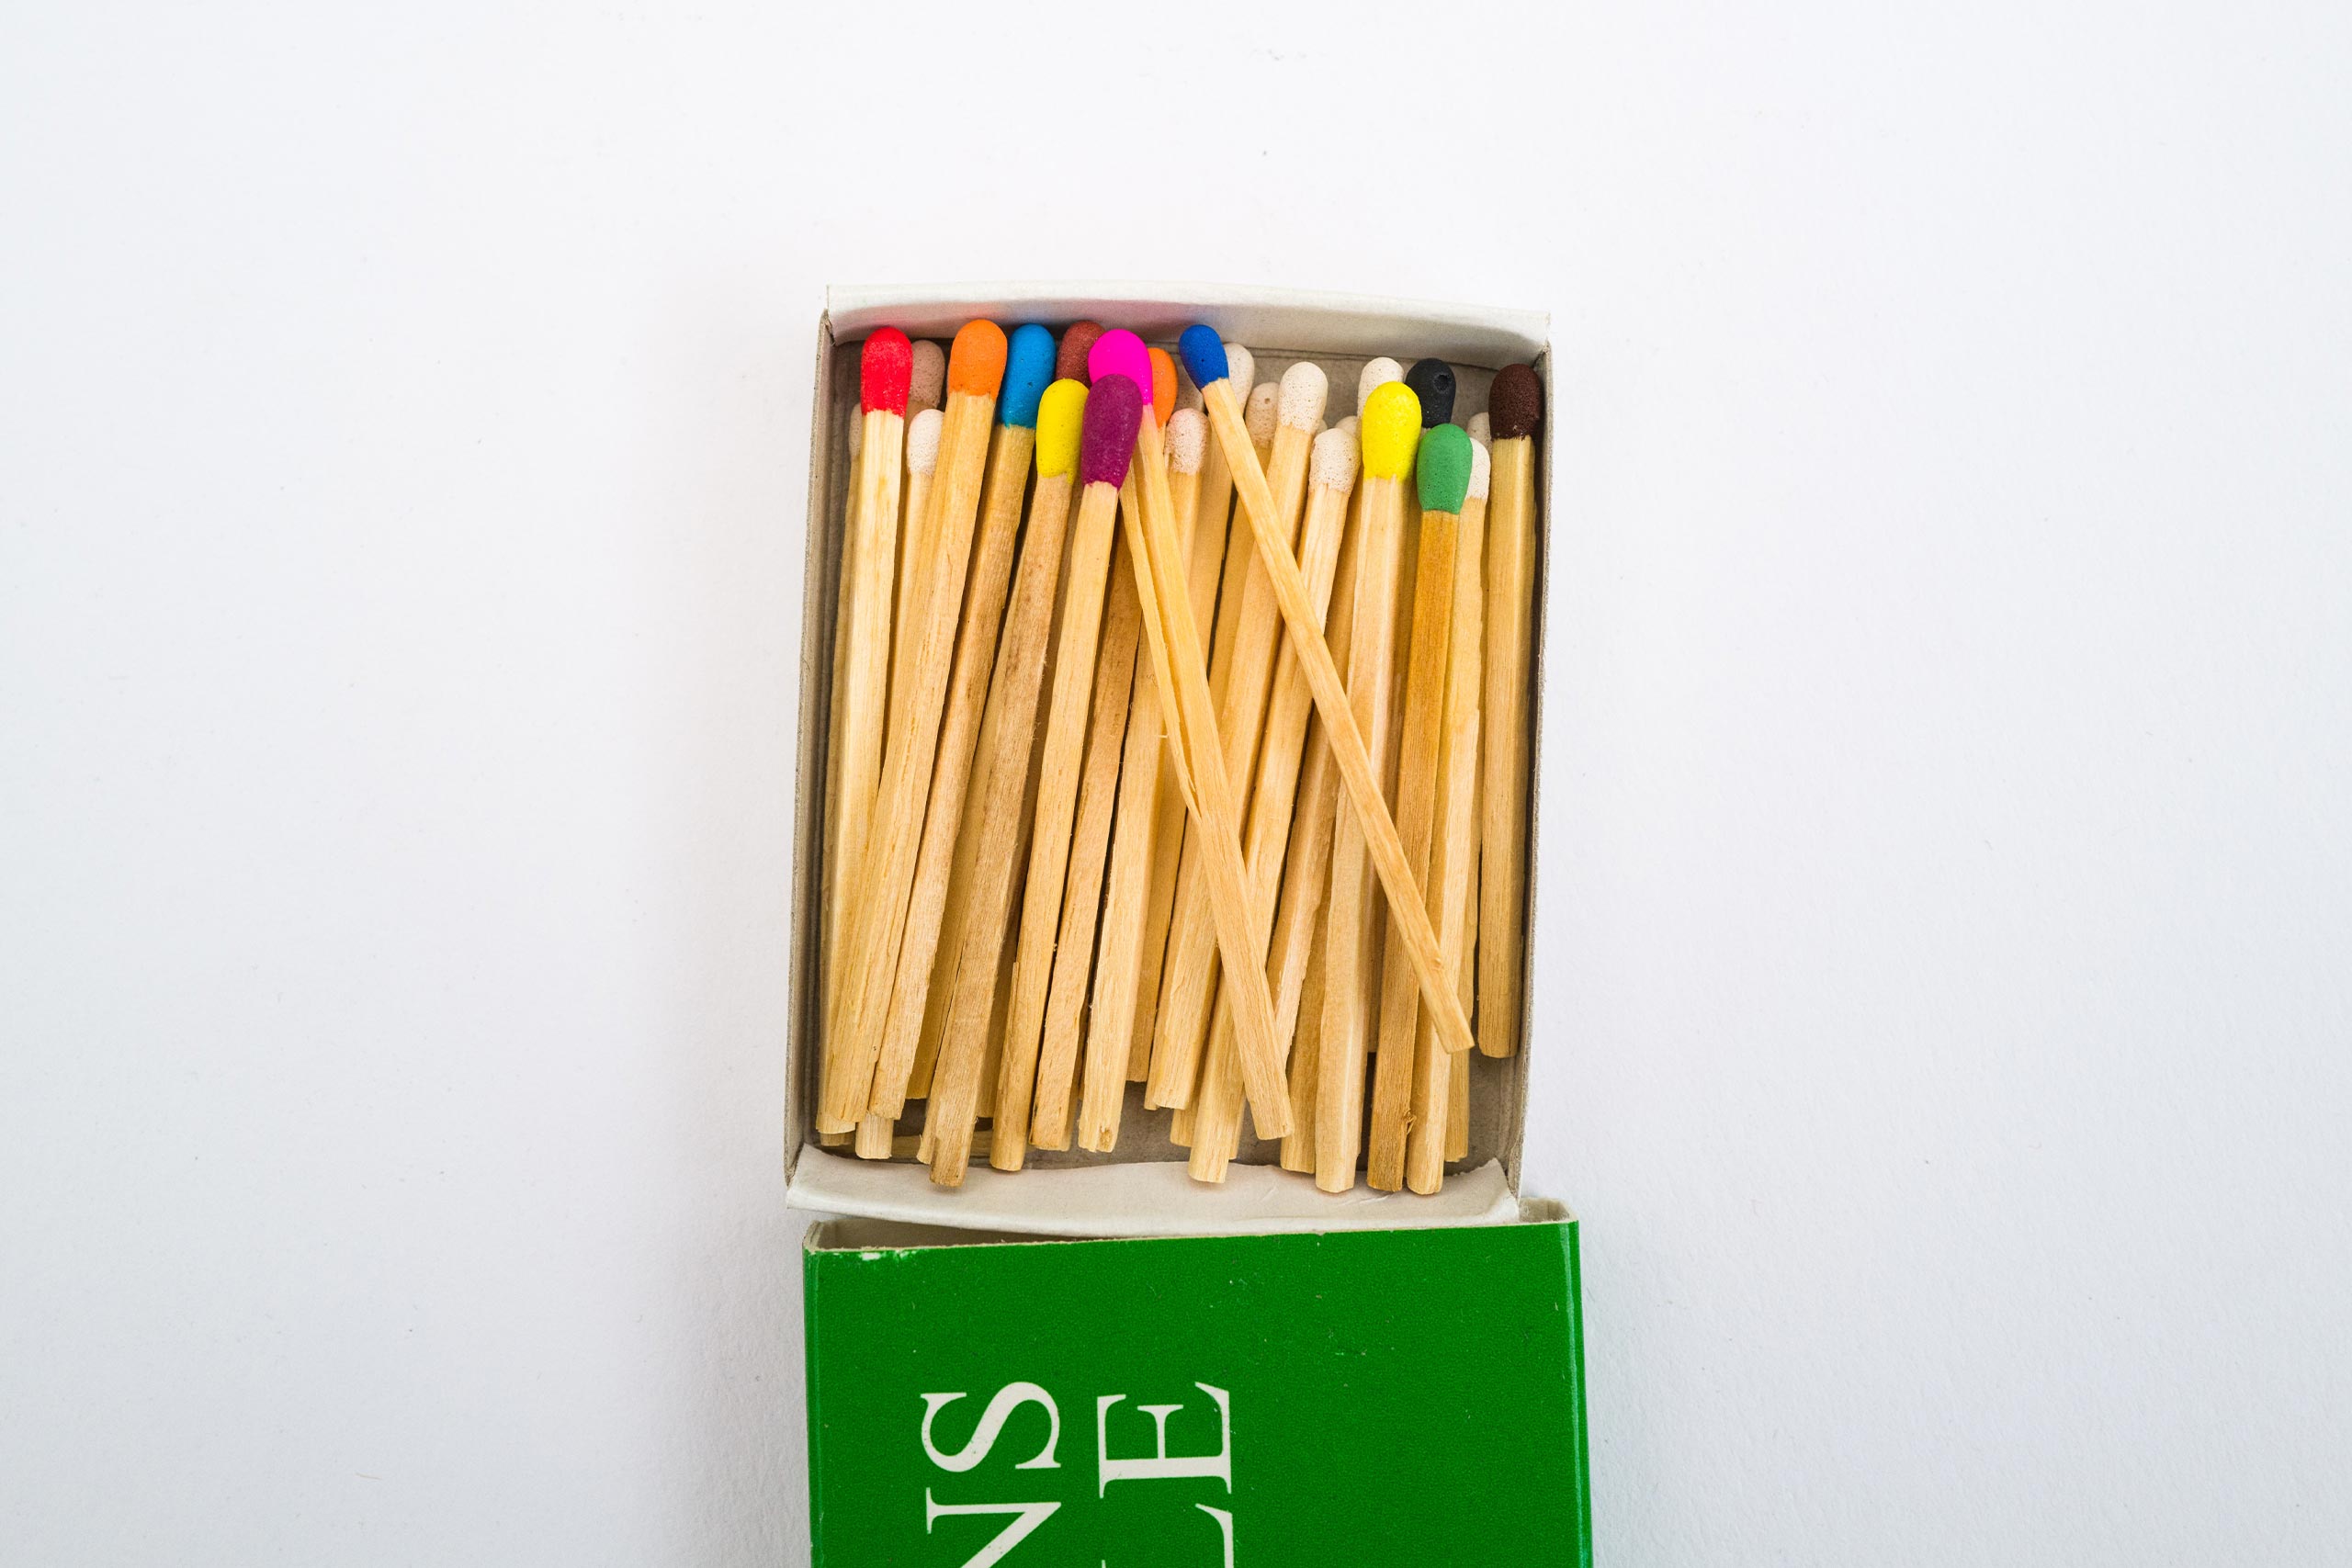 Box of colorful matches resting showing steps burnt out youth leaders can to re-charge and keeping serving